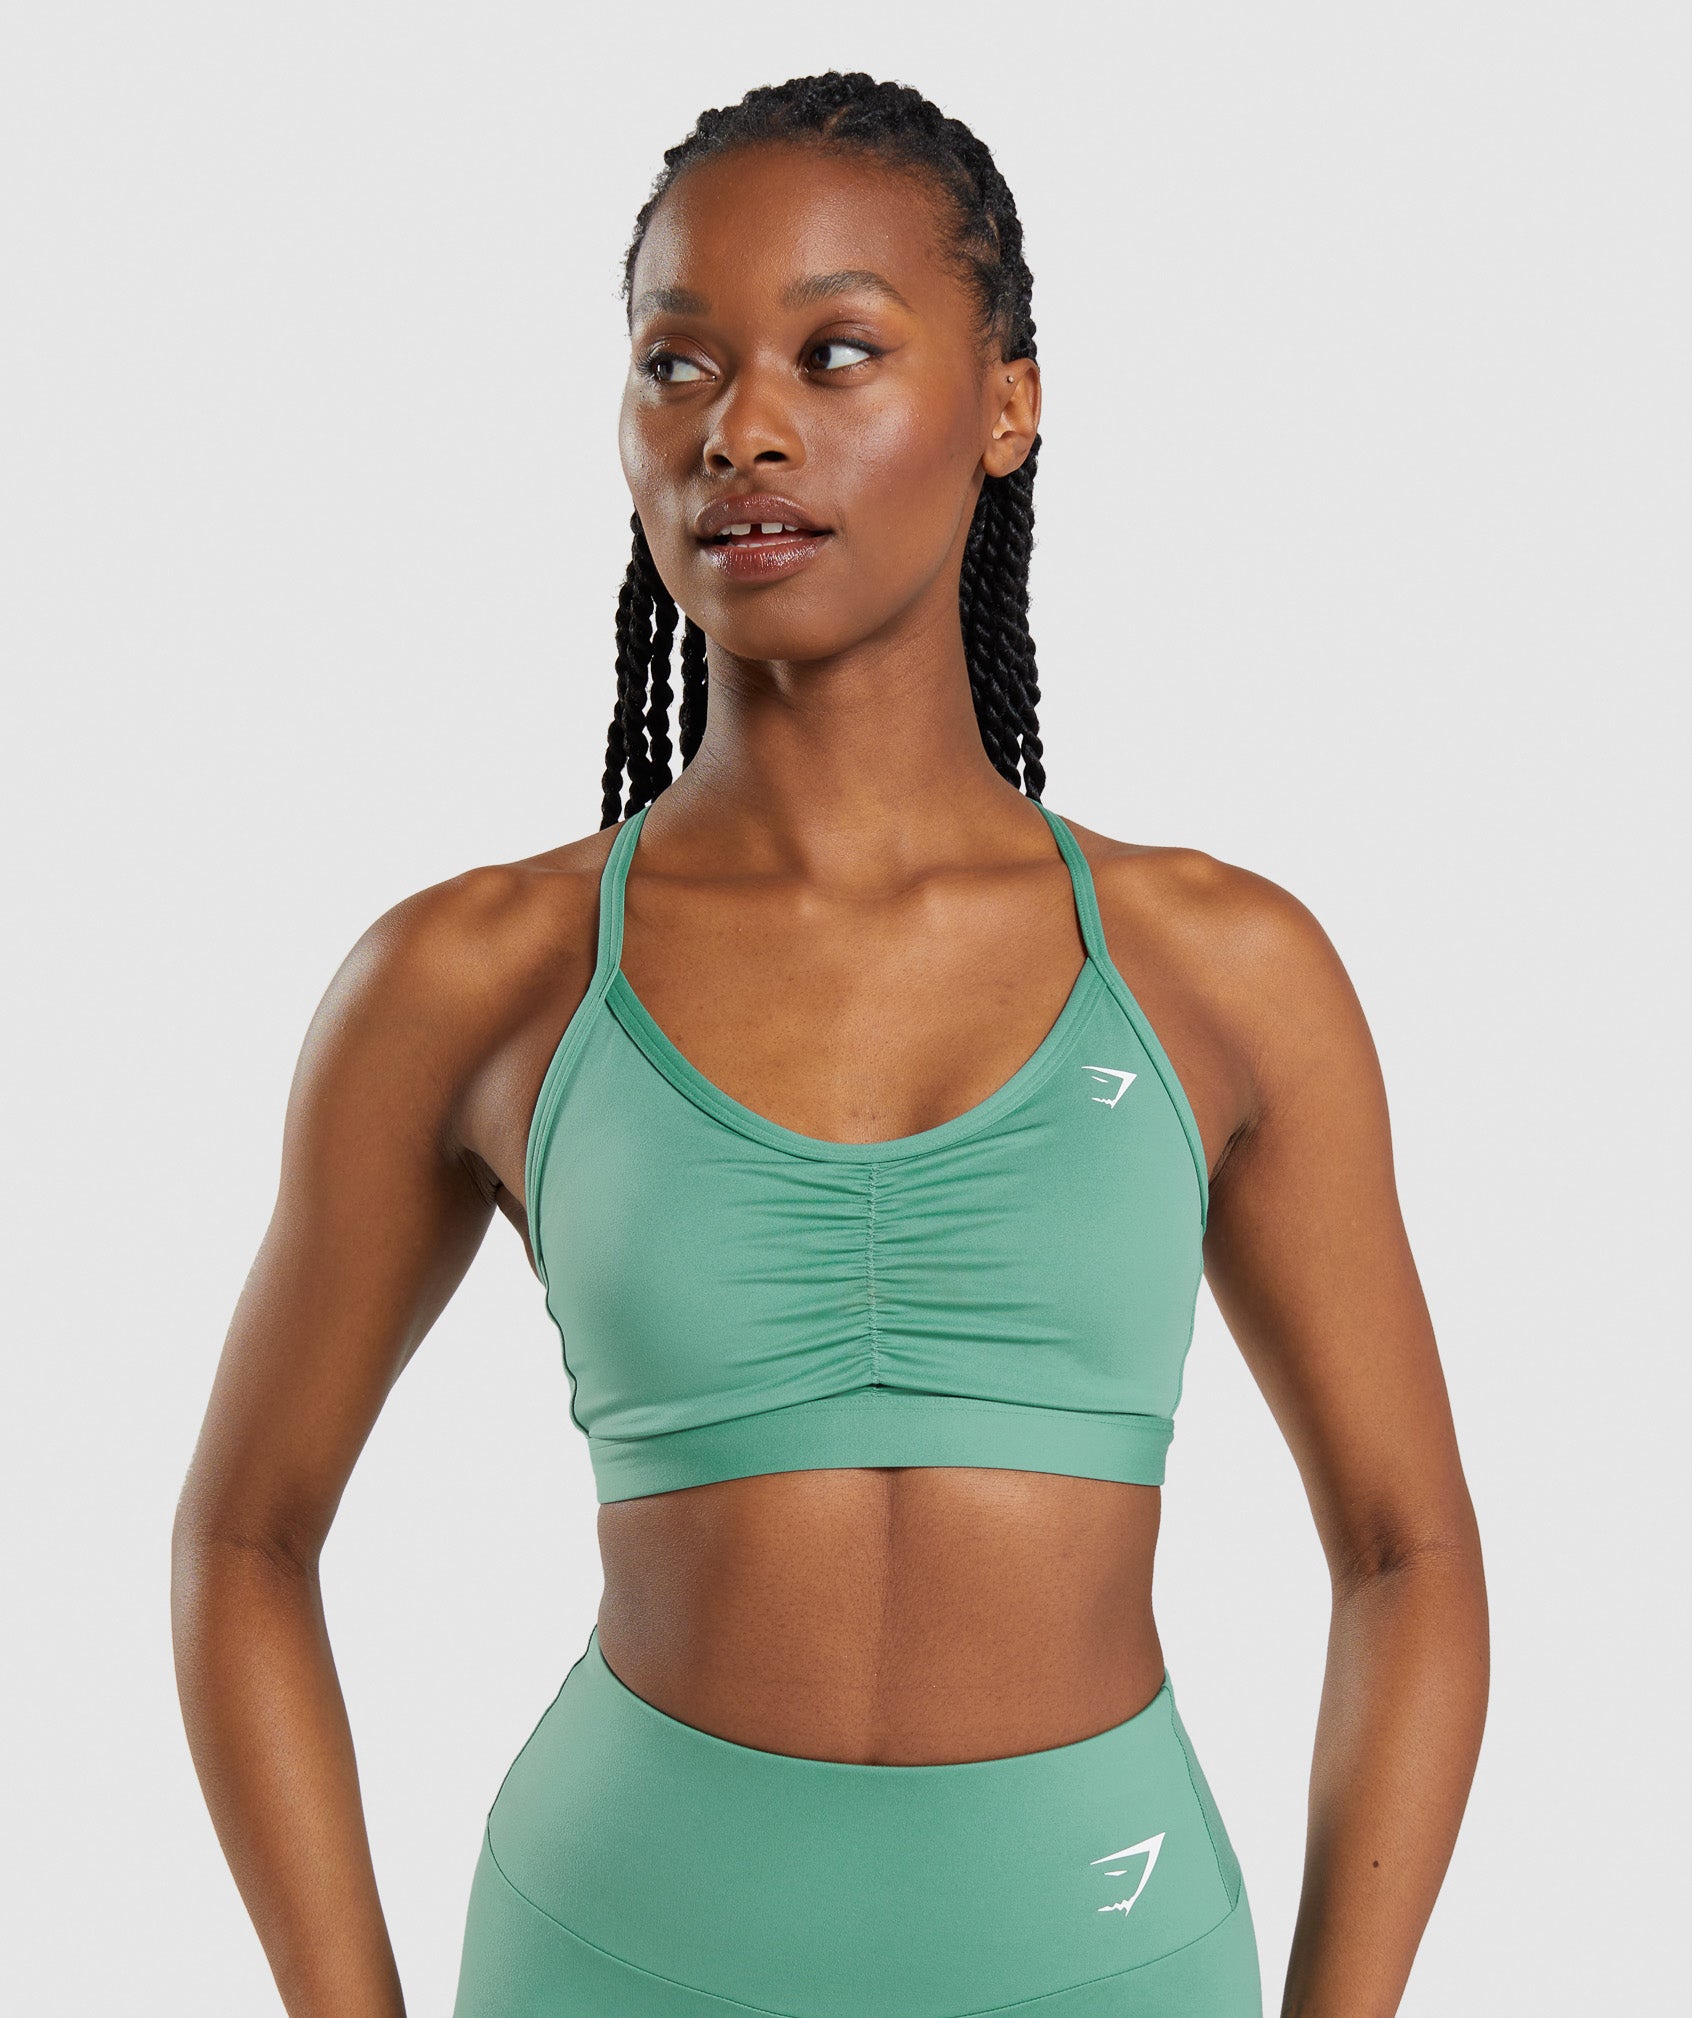 Gymshark Apex Sports Bra Size Medium Lime Green GLSB4457-LGN - AW20-392 -  $32 (44% Off Retail) - From Royal